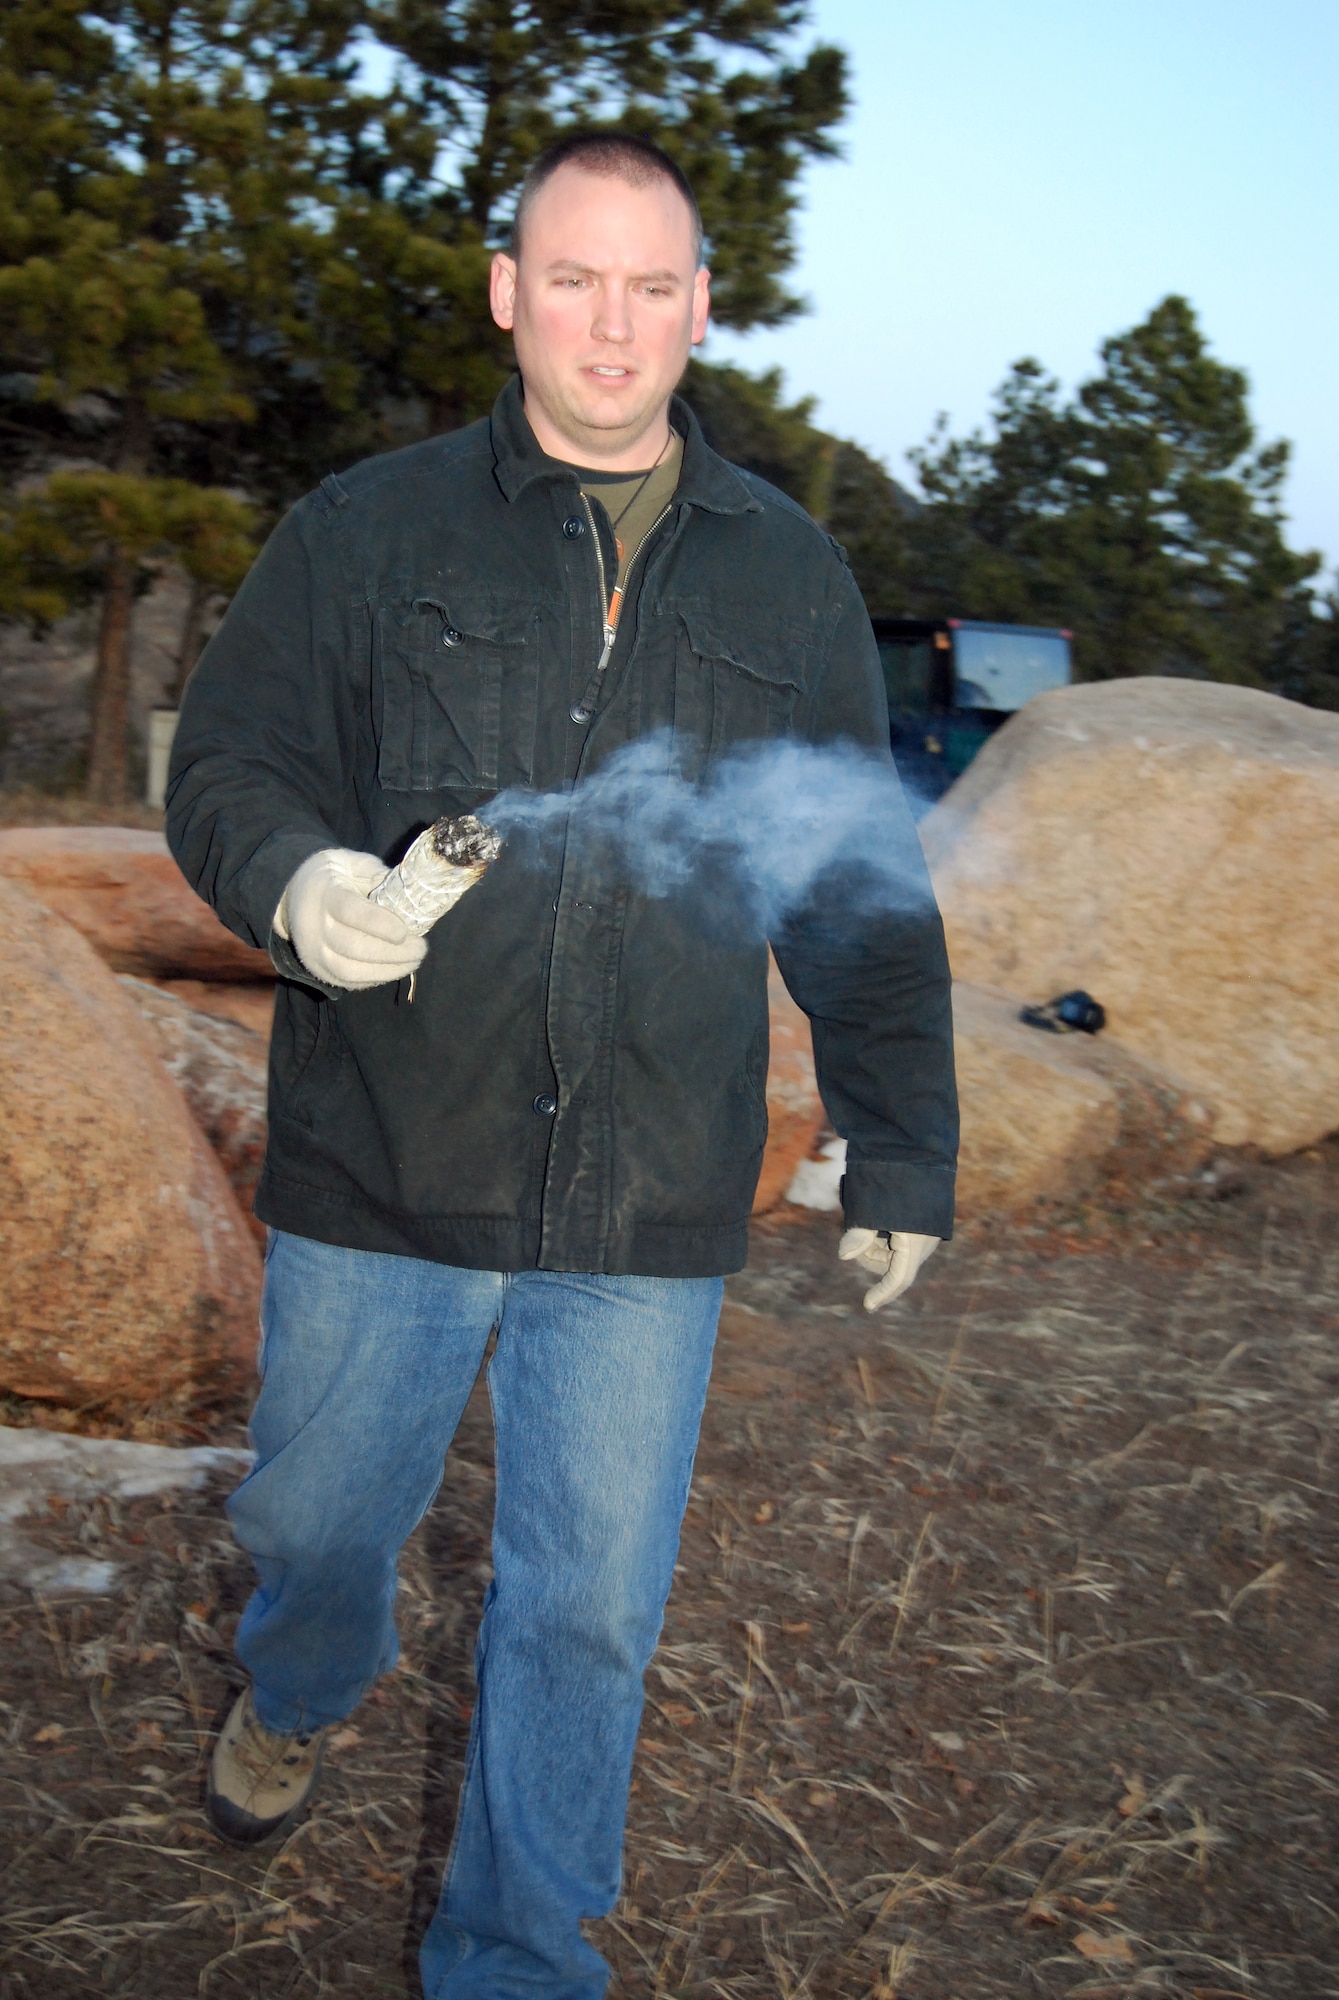 Tech. Sgt. Brandon Longcrier uses white sage to consecrate a Pagan worship area on the hill overlooking the Cadet Chapel and the Visitor Center at the Air Force Academy just after sunrise on the winter solstice, Dec. 21, 2009. The chapel is scheduled to officially designate the circle as a Pagan chapel during a dedication ceremony in March 2010. Sergeant Longcrier is the Pagan lay leader at the Academy. (U.S. Air Force photo/Staff Sgt. Don Branum)